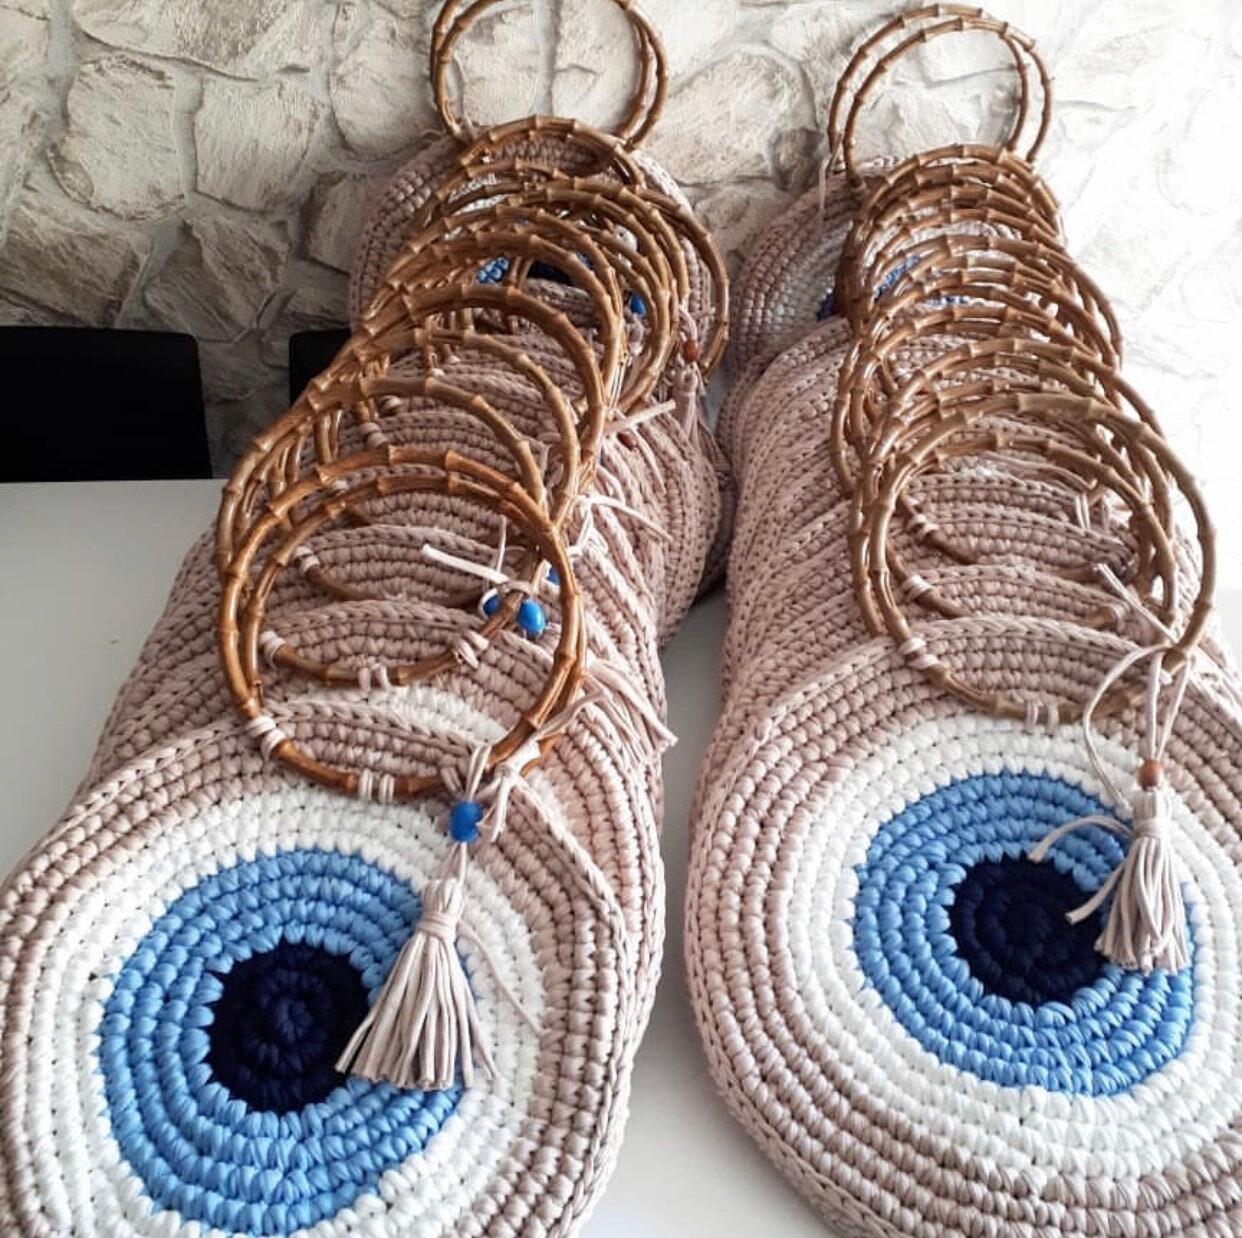 Products :: Evil Eye Bag, Totes for Women, Jute Bag, Silver Crochet Bag,  Water Proof Liner, Eco Friendly Living, Sustainable Gift, Carry All Tote  Bags